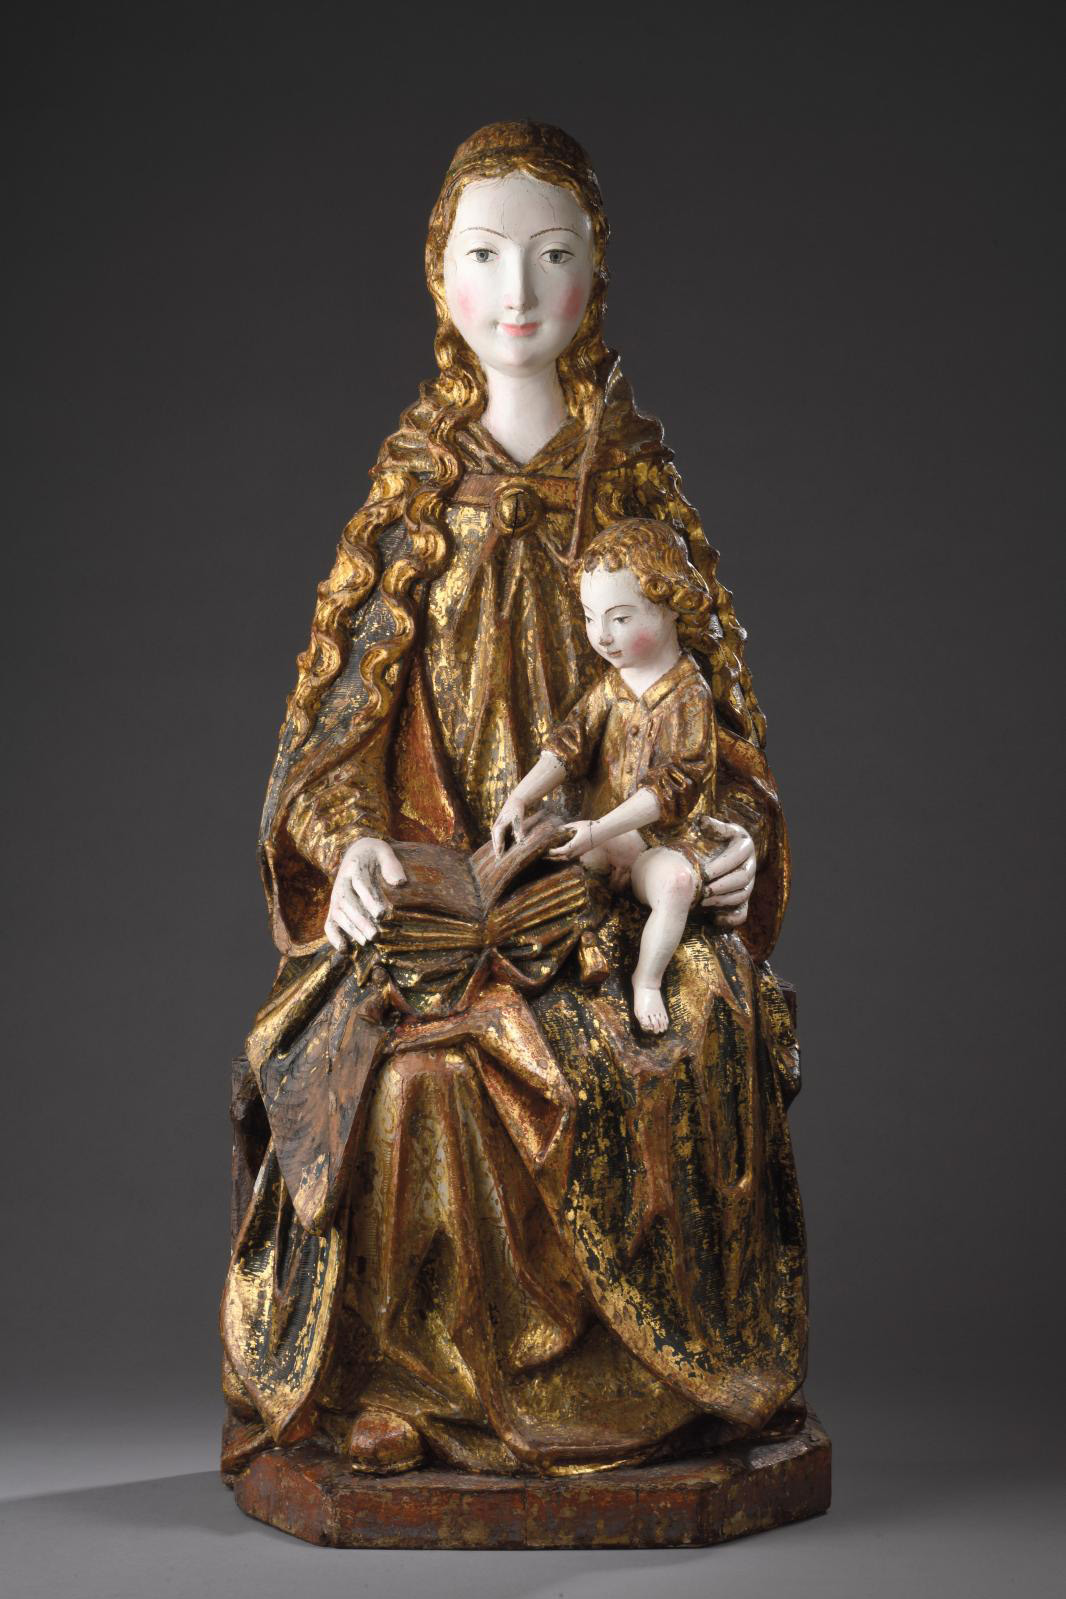 A Mysterious Early 16th-Century Virgin 